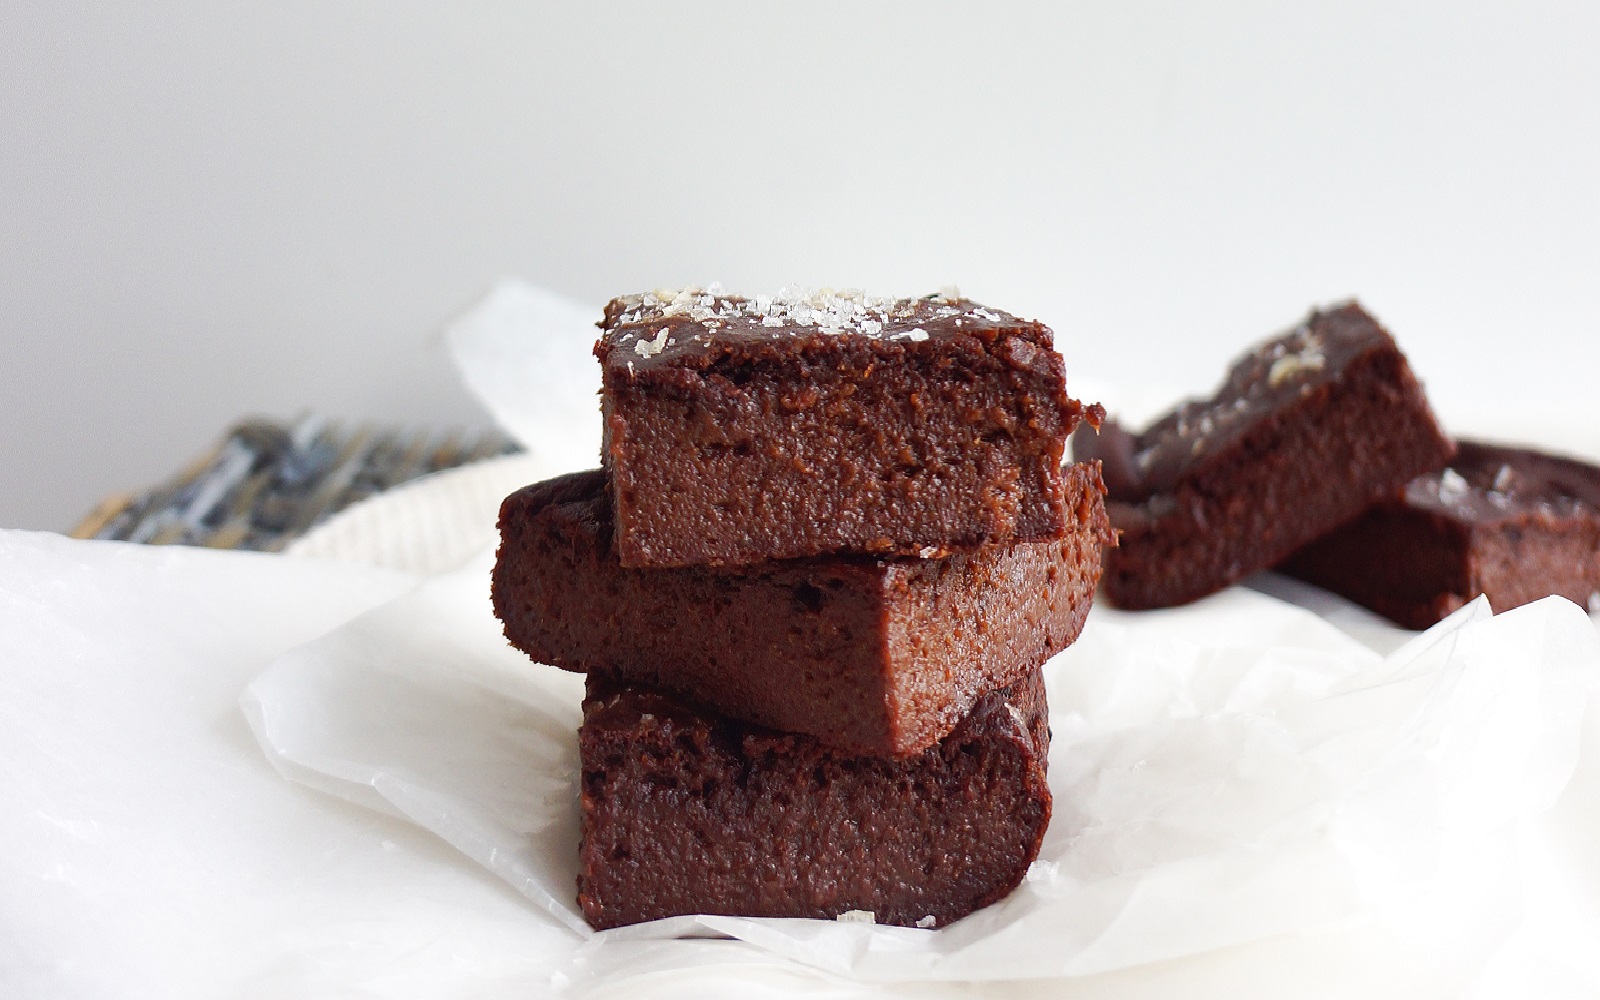 Avocado and Date Brownies With Sea Salt